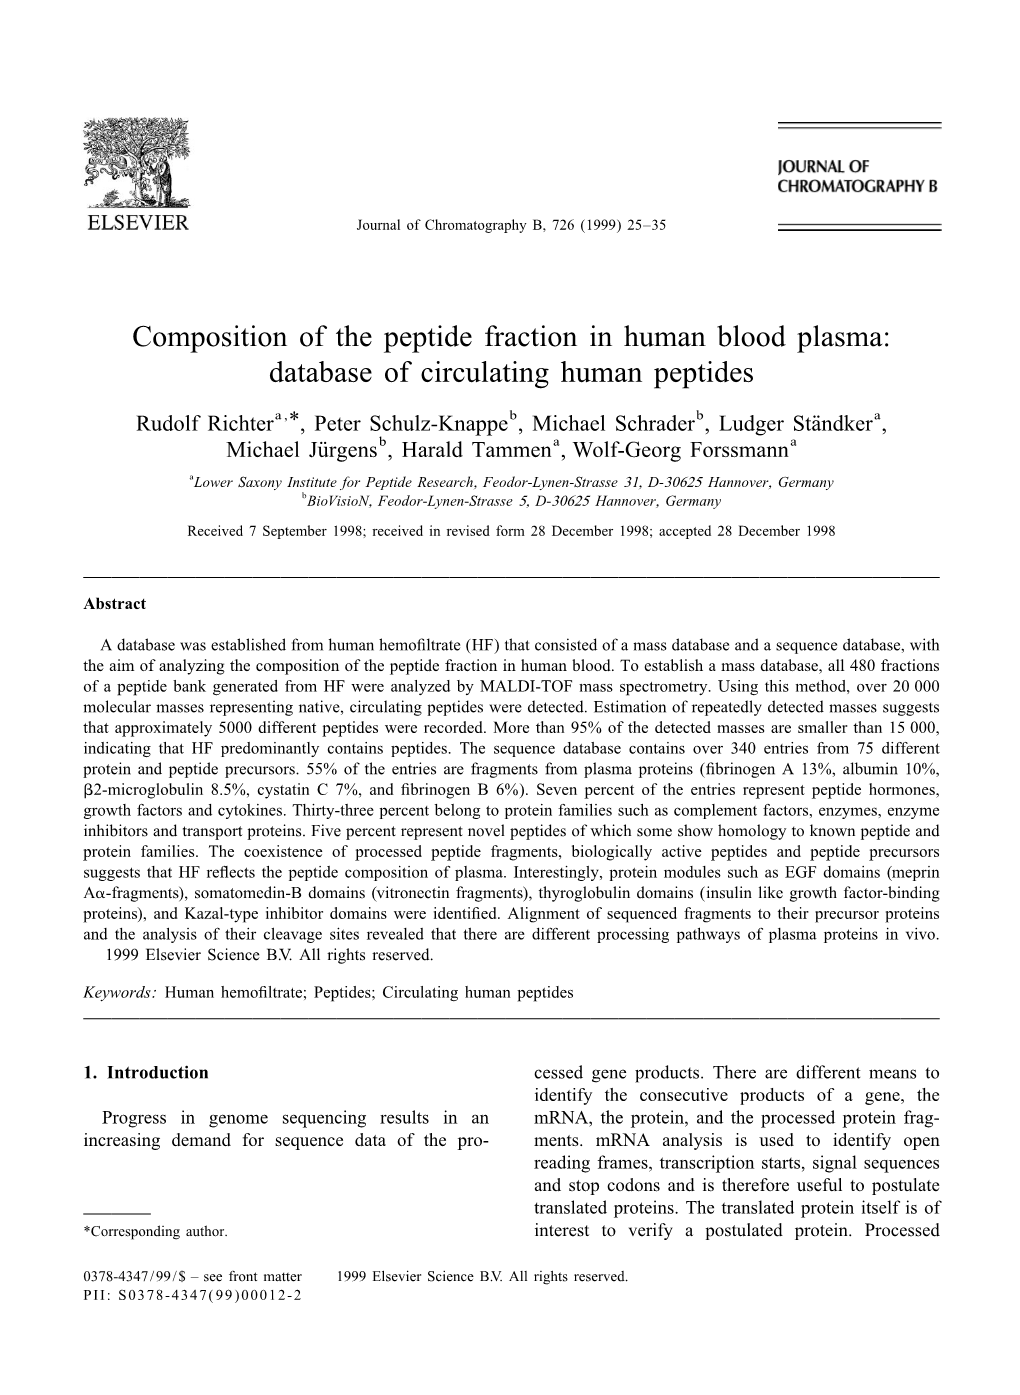 Composition of the Peptide Fraction in Human Blood Plasma: Database of Circulating Human Peptides